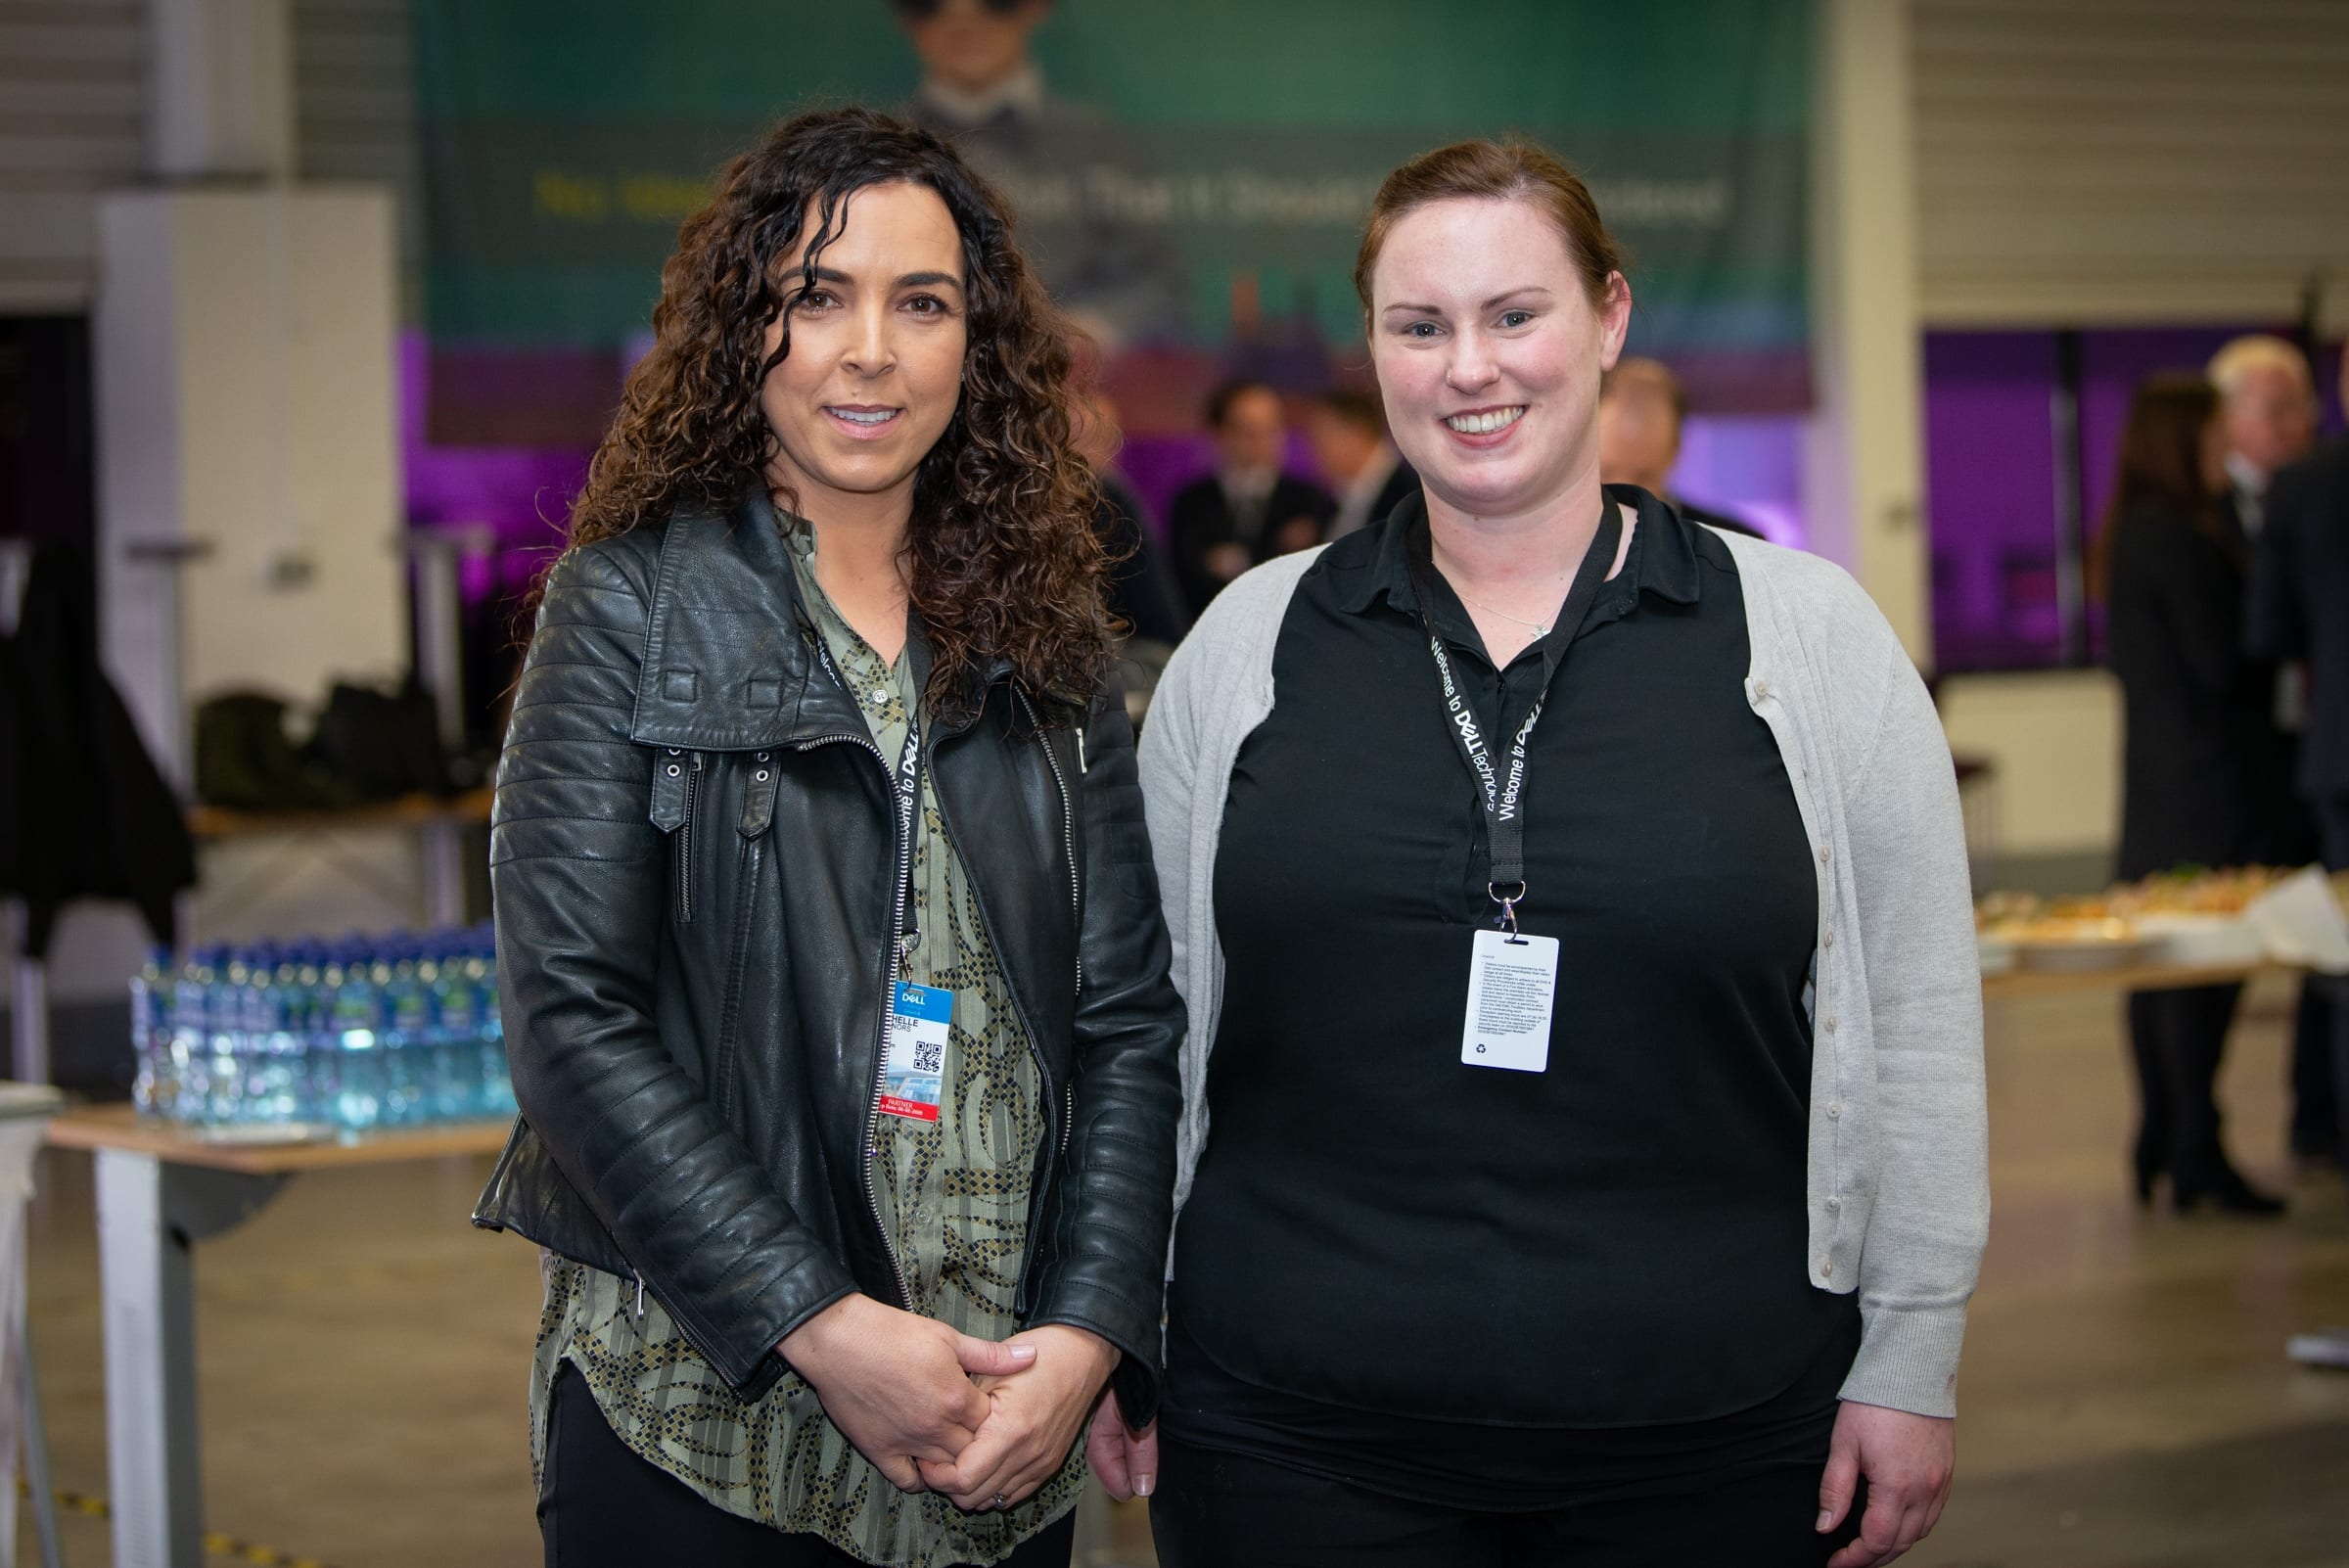 No repro fee-RLP Programme Launch which was held in DELL EMC, Raheen Industrial Est Limerick on Thursday 6th February - From Left to Right: Michelle Shinnors- Northern Trust, Meabh Scanlon - Northern Trust 
Photo credit Shauna Kennedy